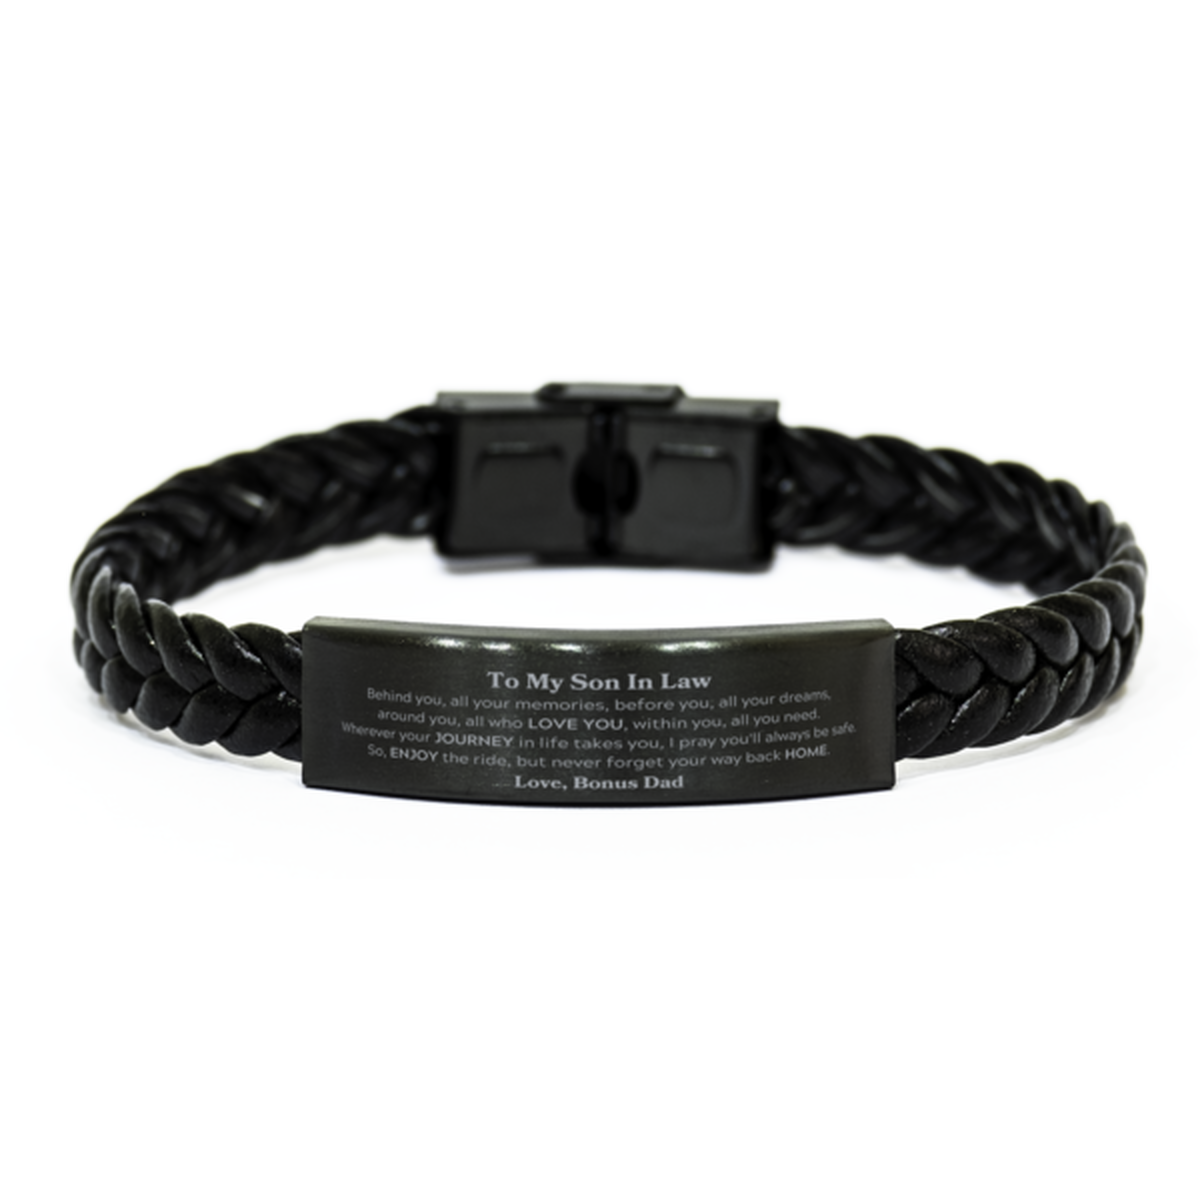 To My Son In Law Graduation Gifts from Bonus Dad, Son In Law Braided Leather Bracelet Christmas Birthday Gifts for Son In Law Behind you, all your memories, before you, all your dreams. Love, Bonus Dad